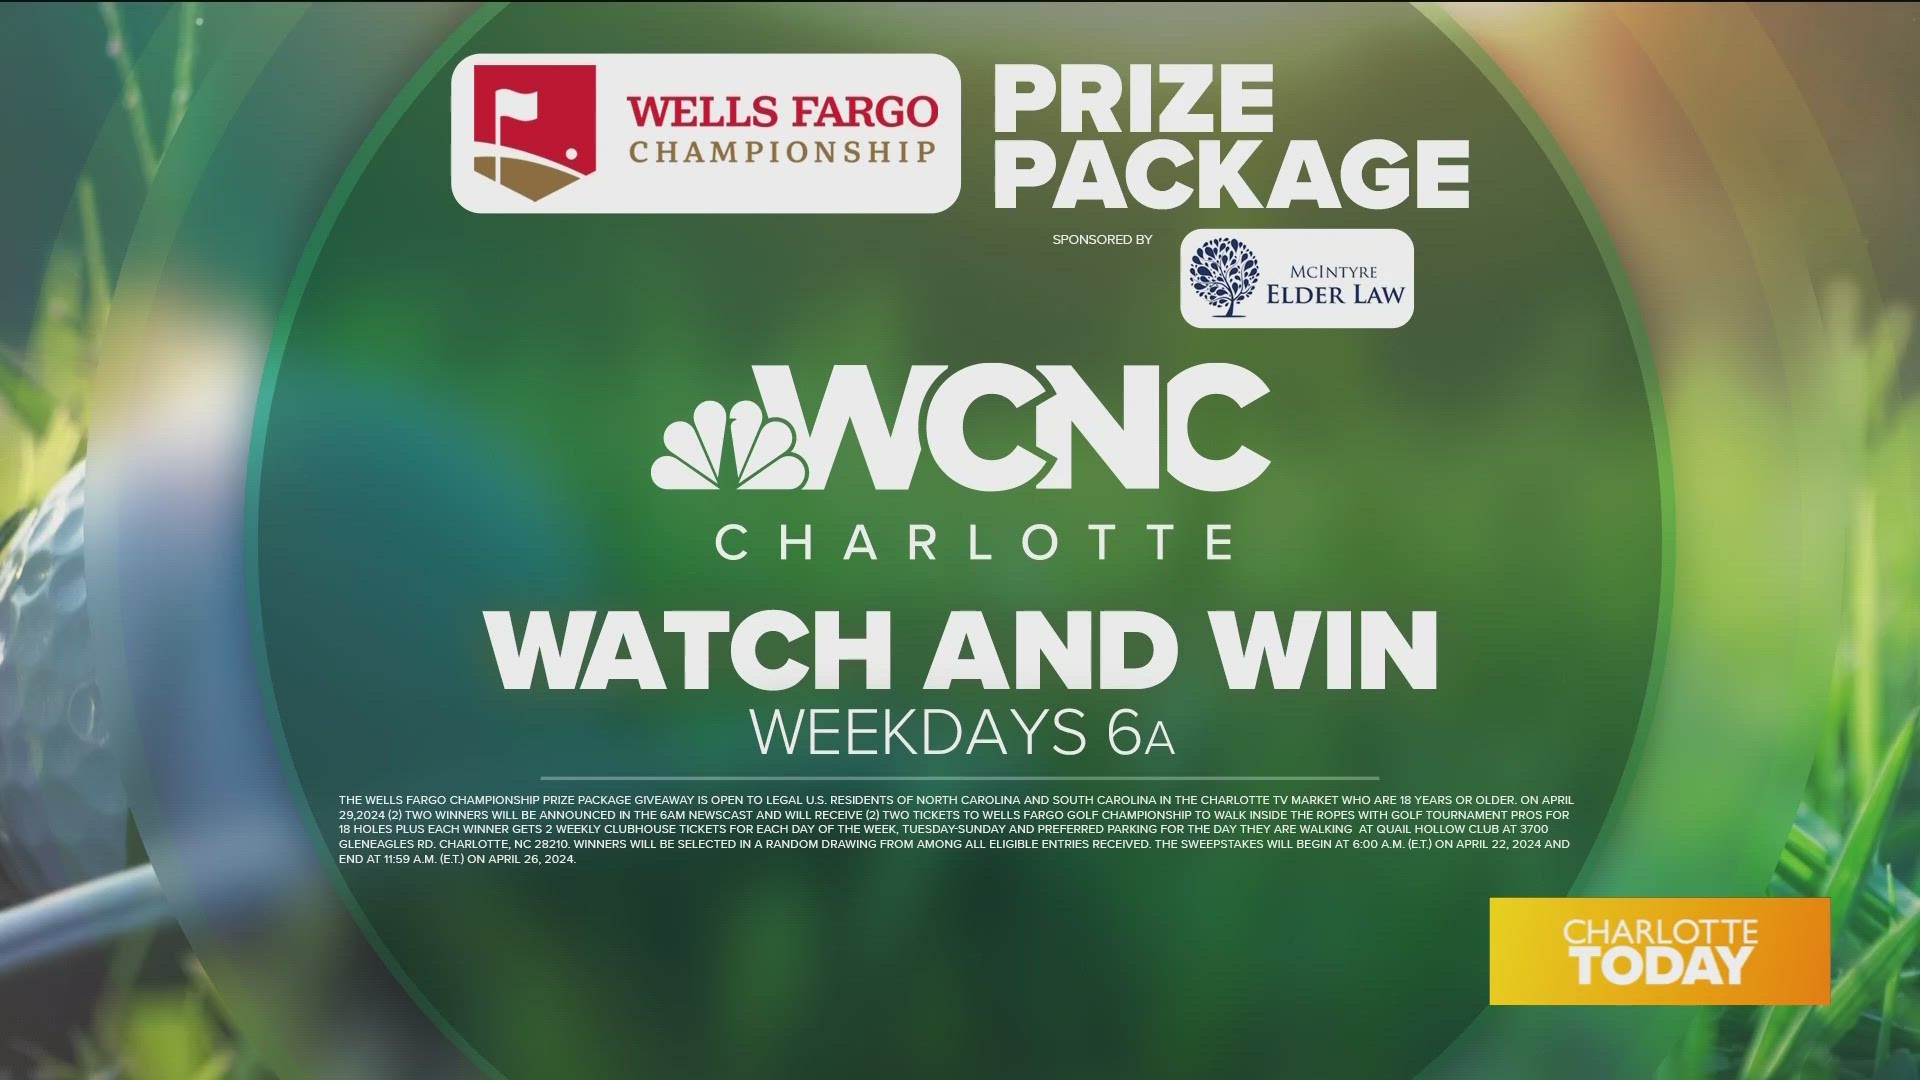 You could win all access passes to the Wells Fargo Championship